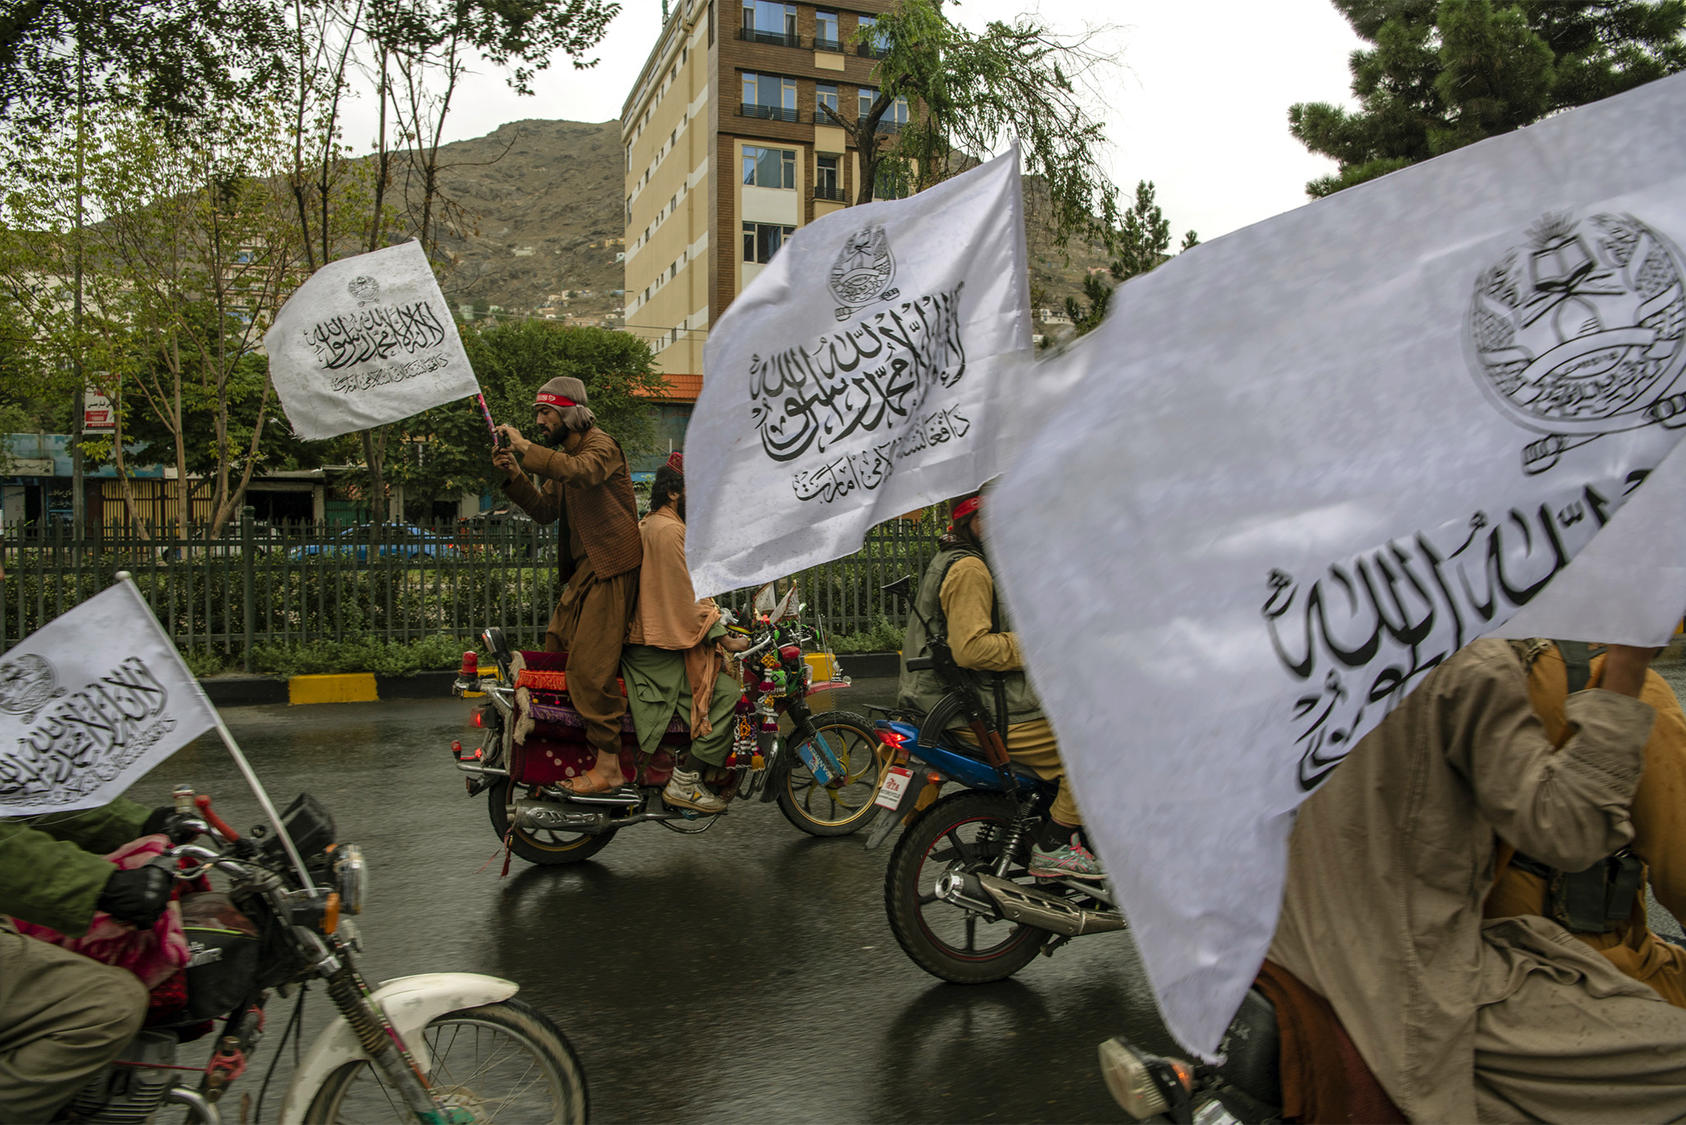 Taliban fighters, many of whom drove in from neighboring provinces, gather in Kabul to celebrate the first anniversary of their seizure of control over the capital on Monday, Aug. 15, 2022. (Kiana Hayeri/The New York Times)